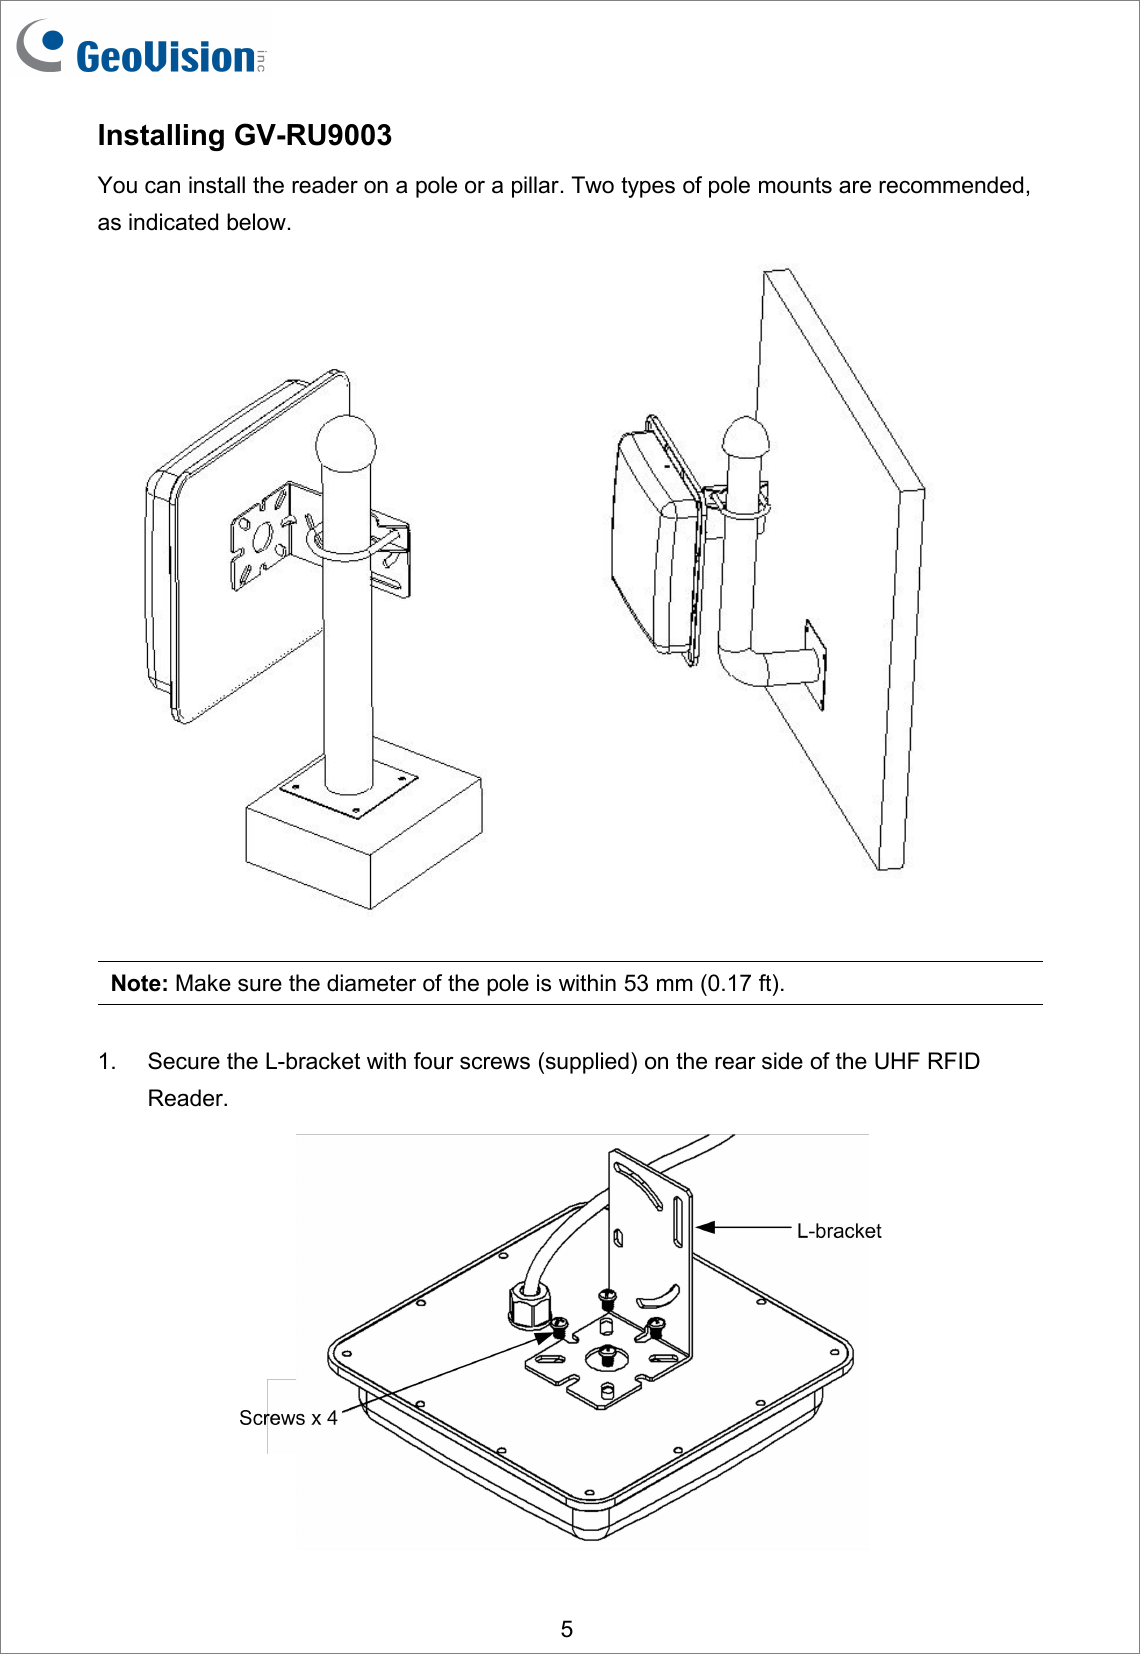 5Installing GV-RU9003You can install the reader on a pole or a pillar. Two types of pole mounts are recommended,as indicated below.Note: Make sure the diameter of the pole is within 53 mm (0.17 ft).1. Secure the L-bracket with four screws (supplied) on the rear side of the UHF RFIDReader.